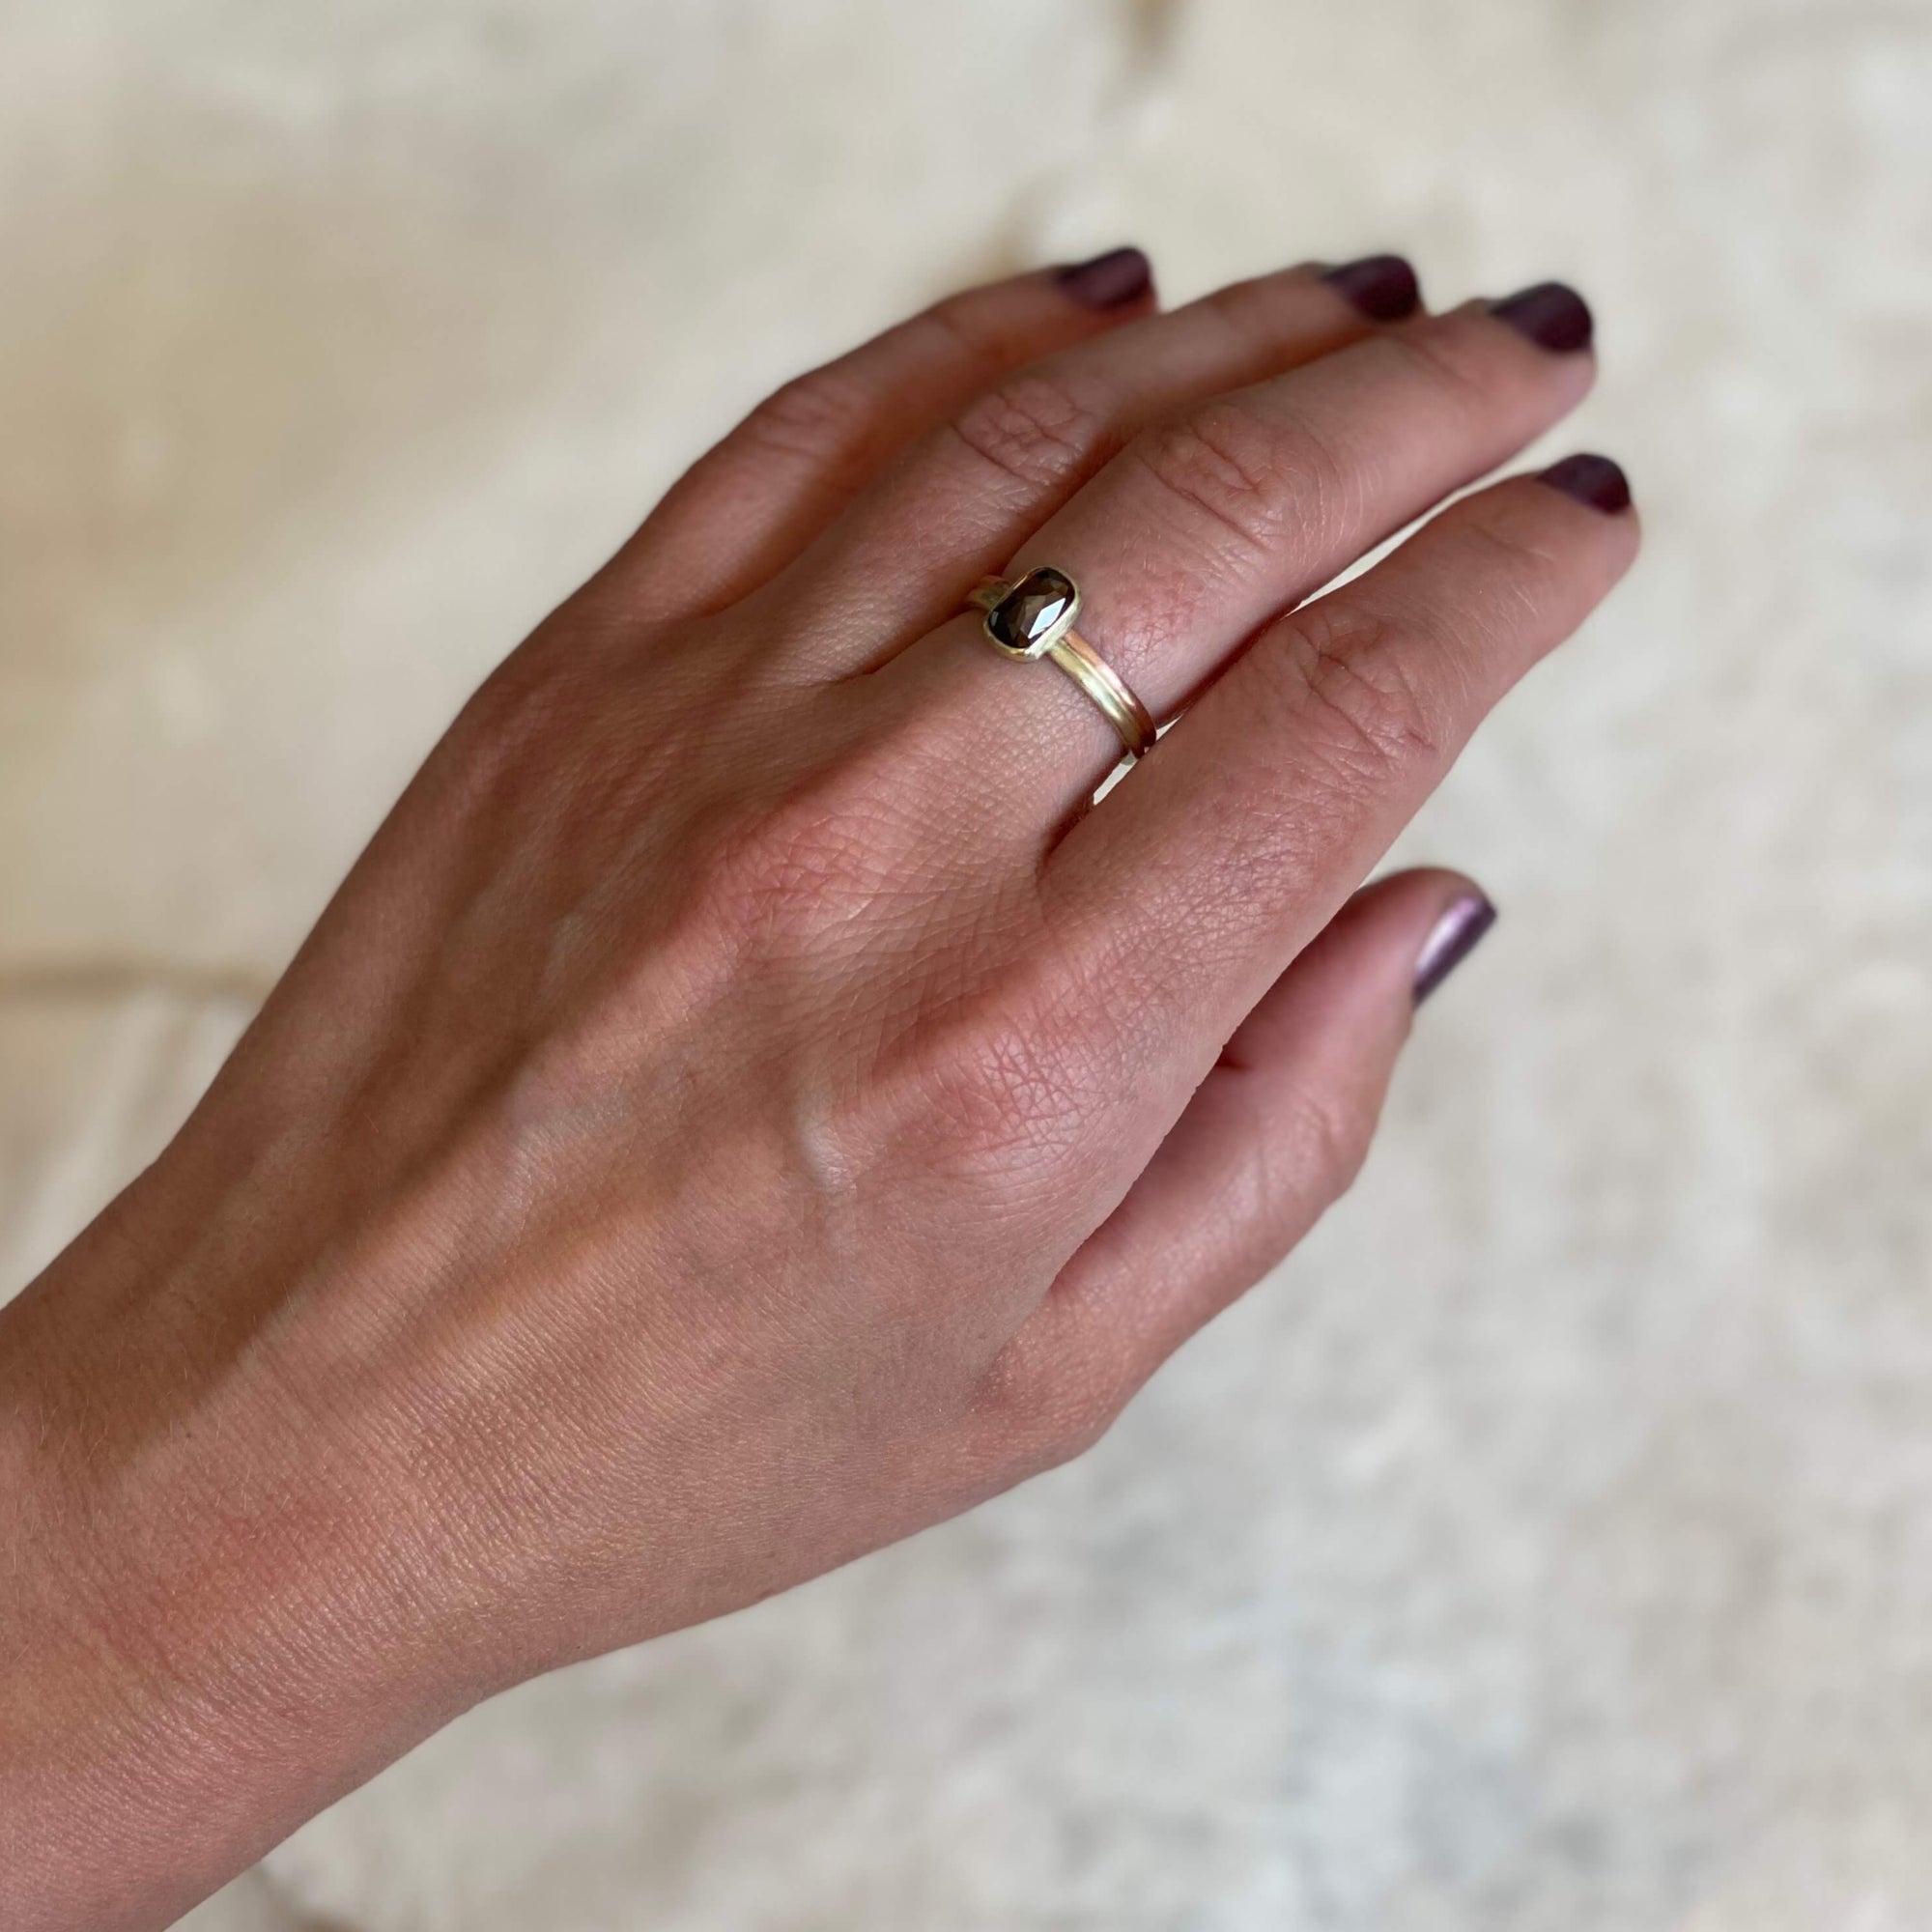 Modern engagement ring with a rose cut champagne diamond on a dual band of rose gold and yellow gold. Handmade with recycled metal and conflict-free stone. Ethically crafted by EC Design Jewelry in Minneapolis, MN.